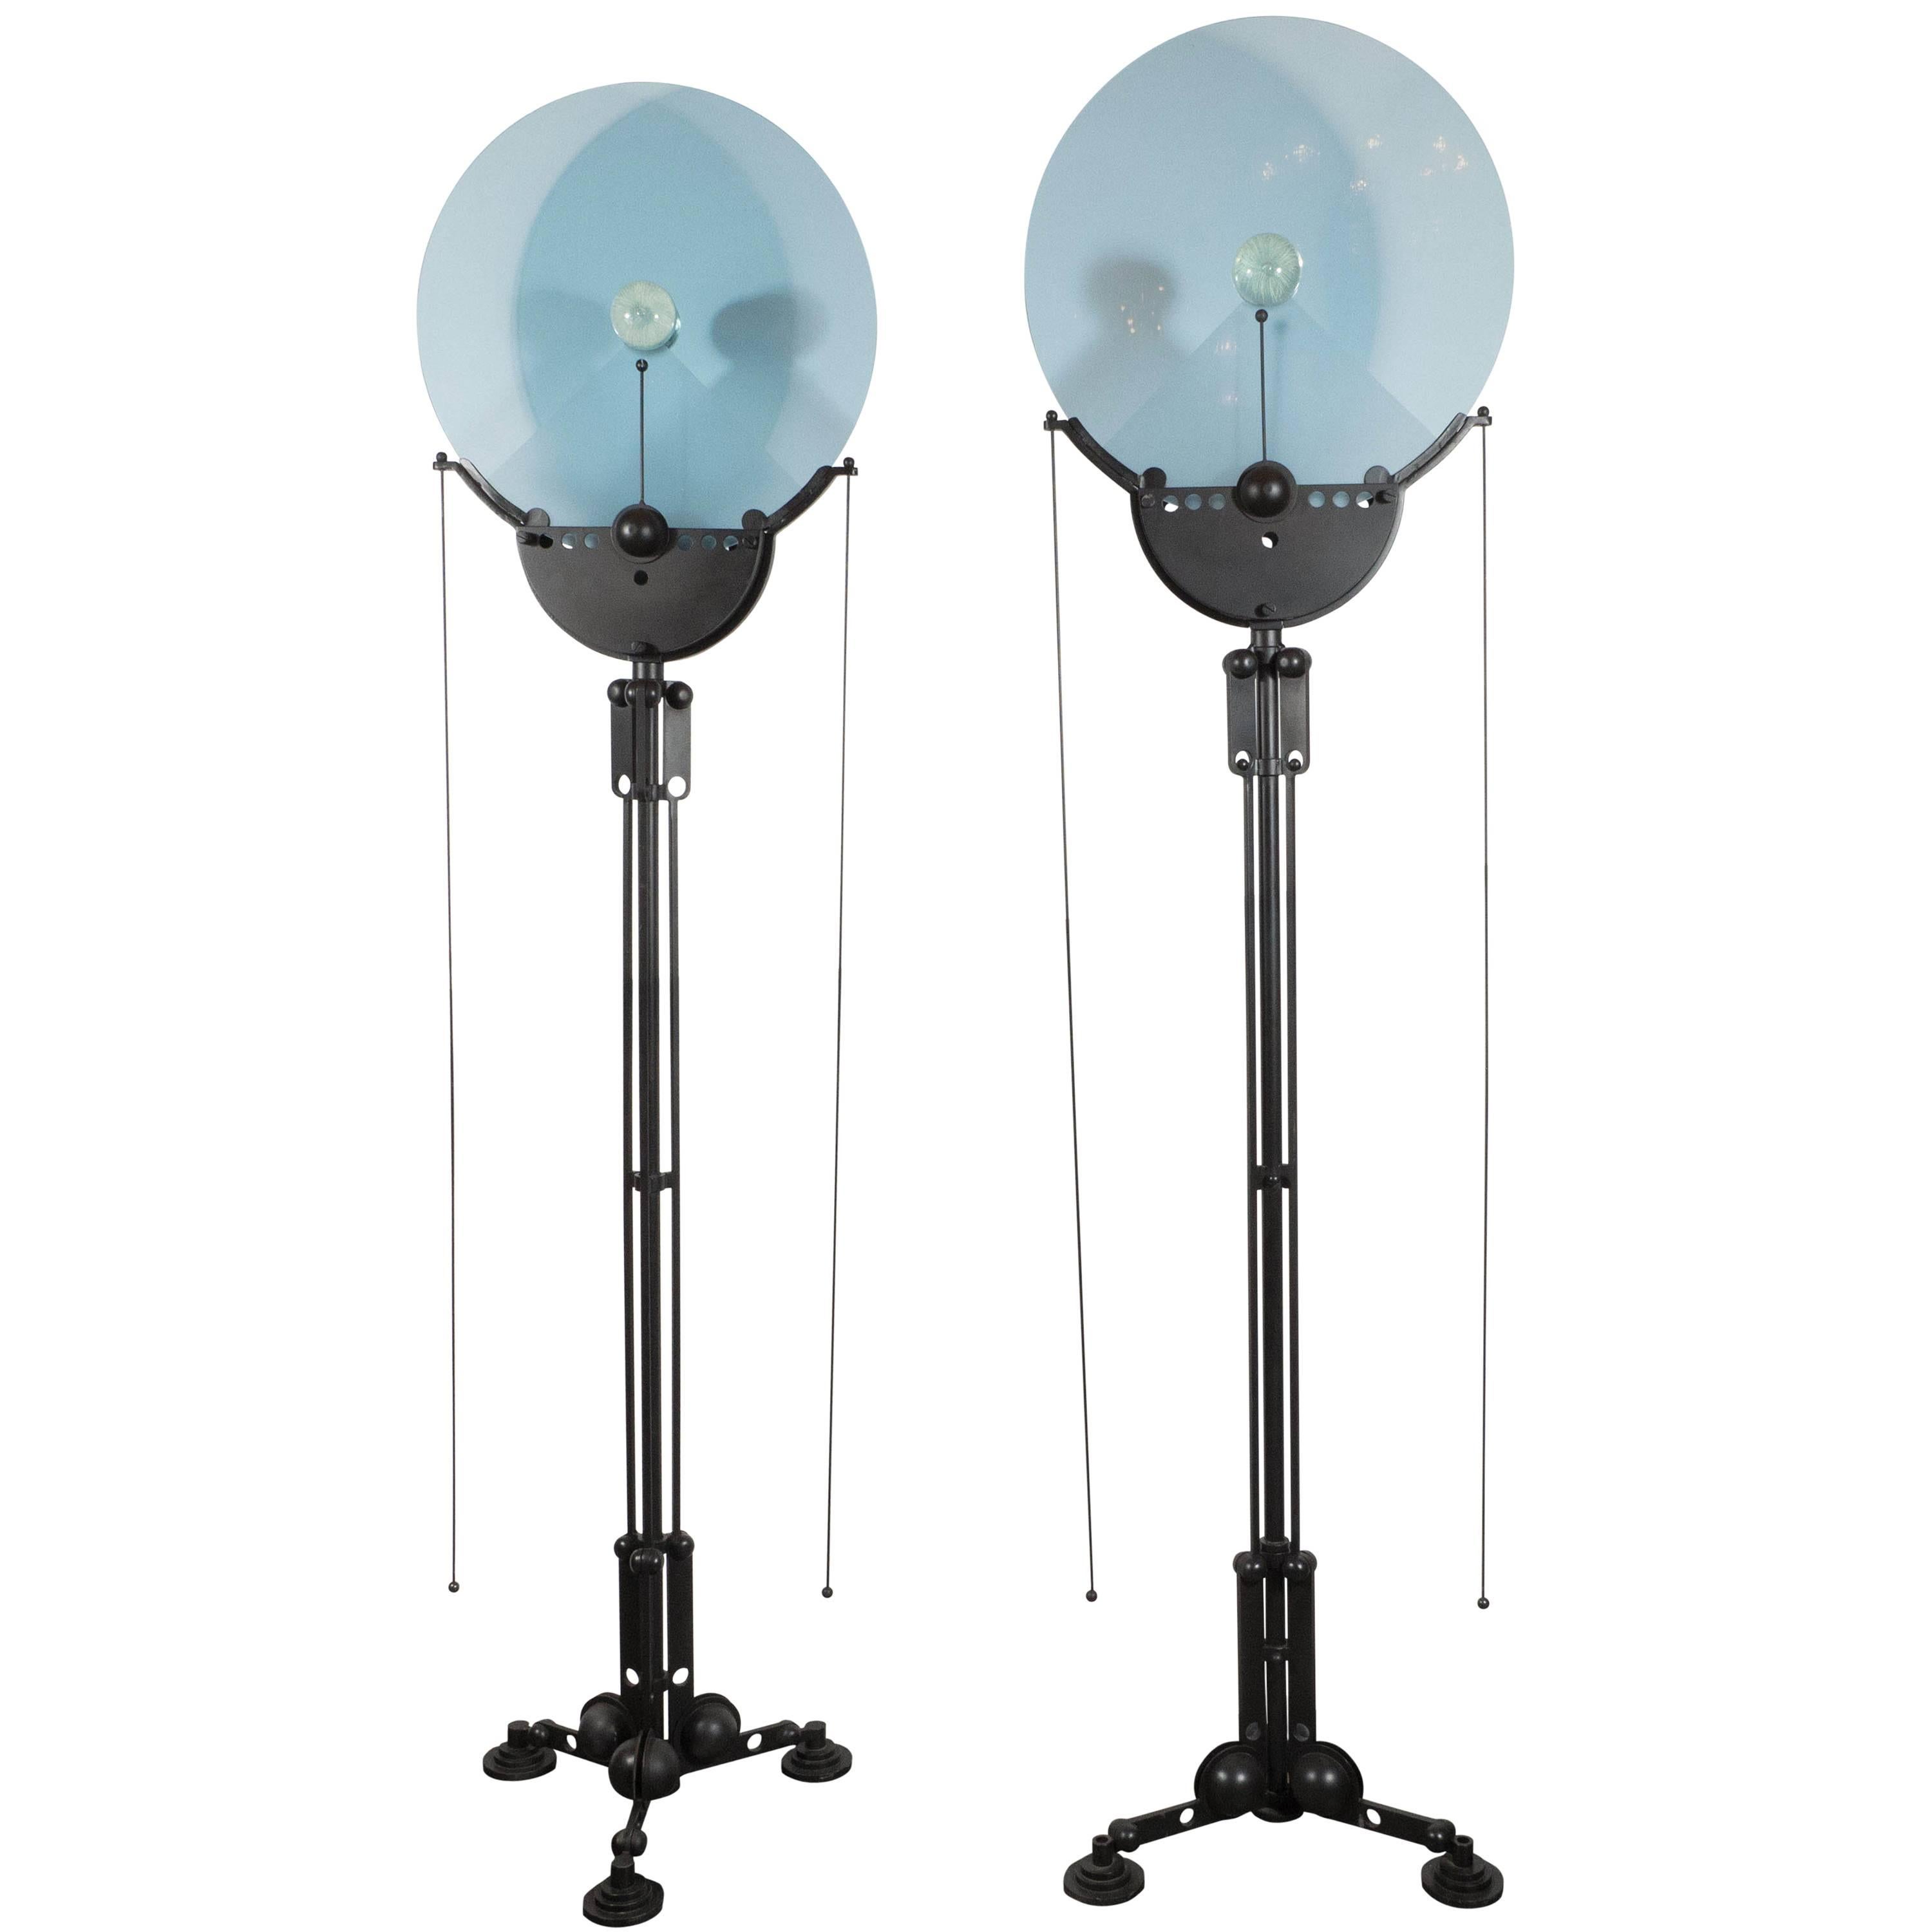 Pair of Structural Memphis Industrial Style Floor Lamps with Murano Glass Discs